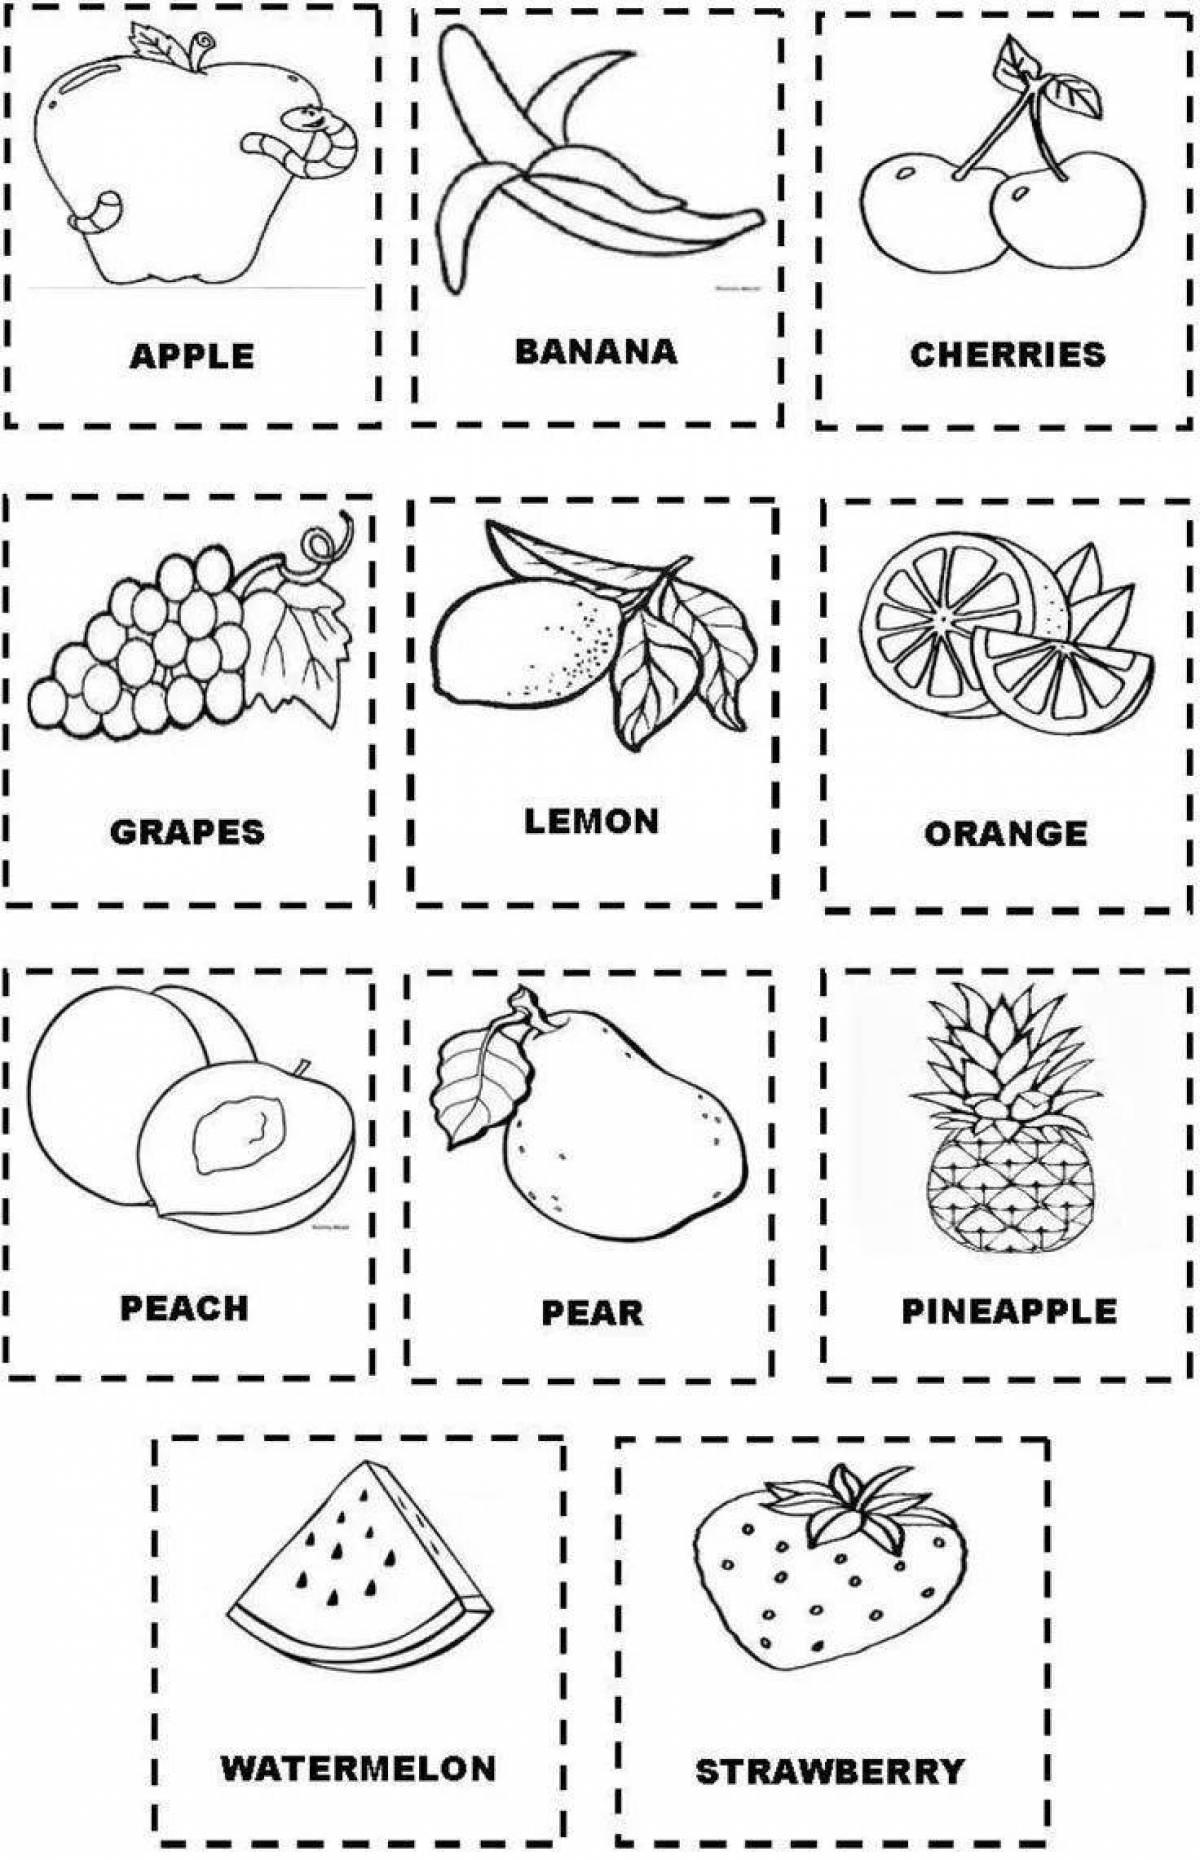 Fun coloring of vegetables for kids